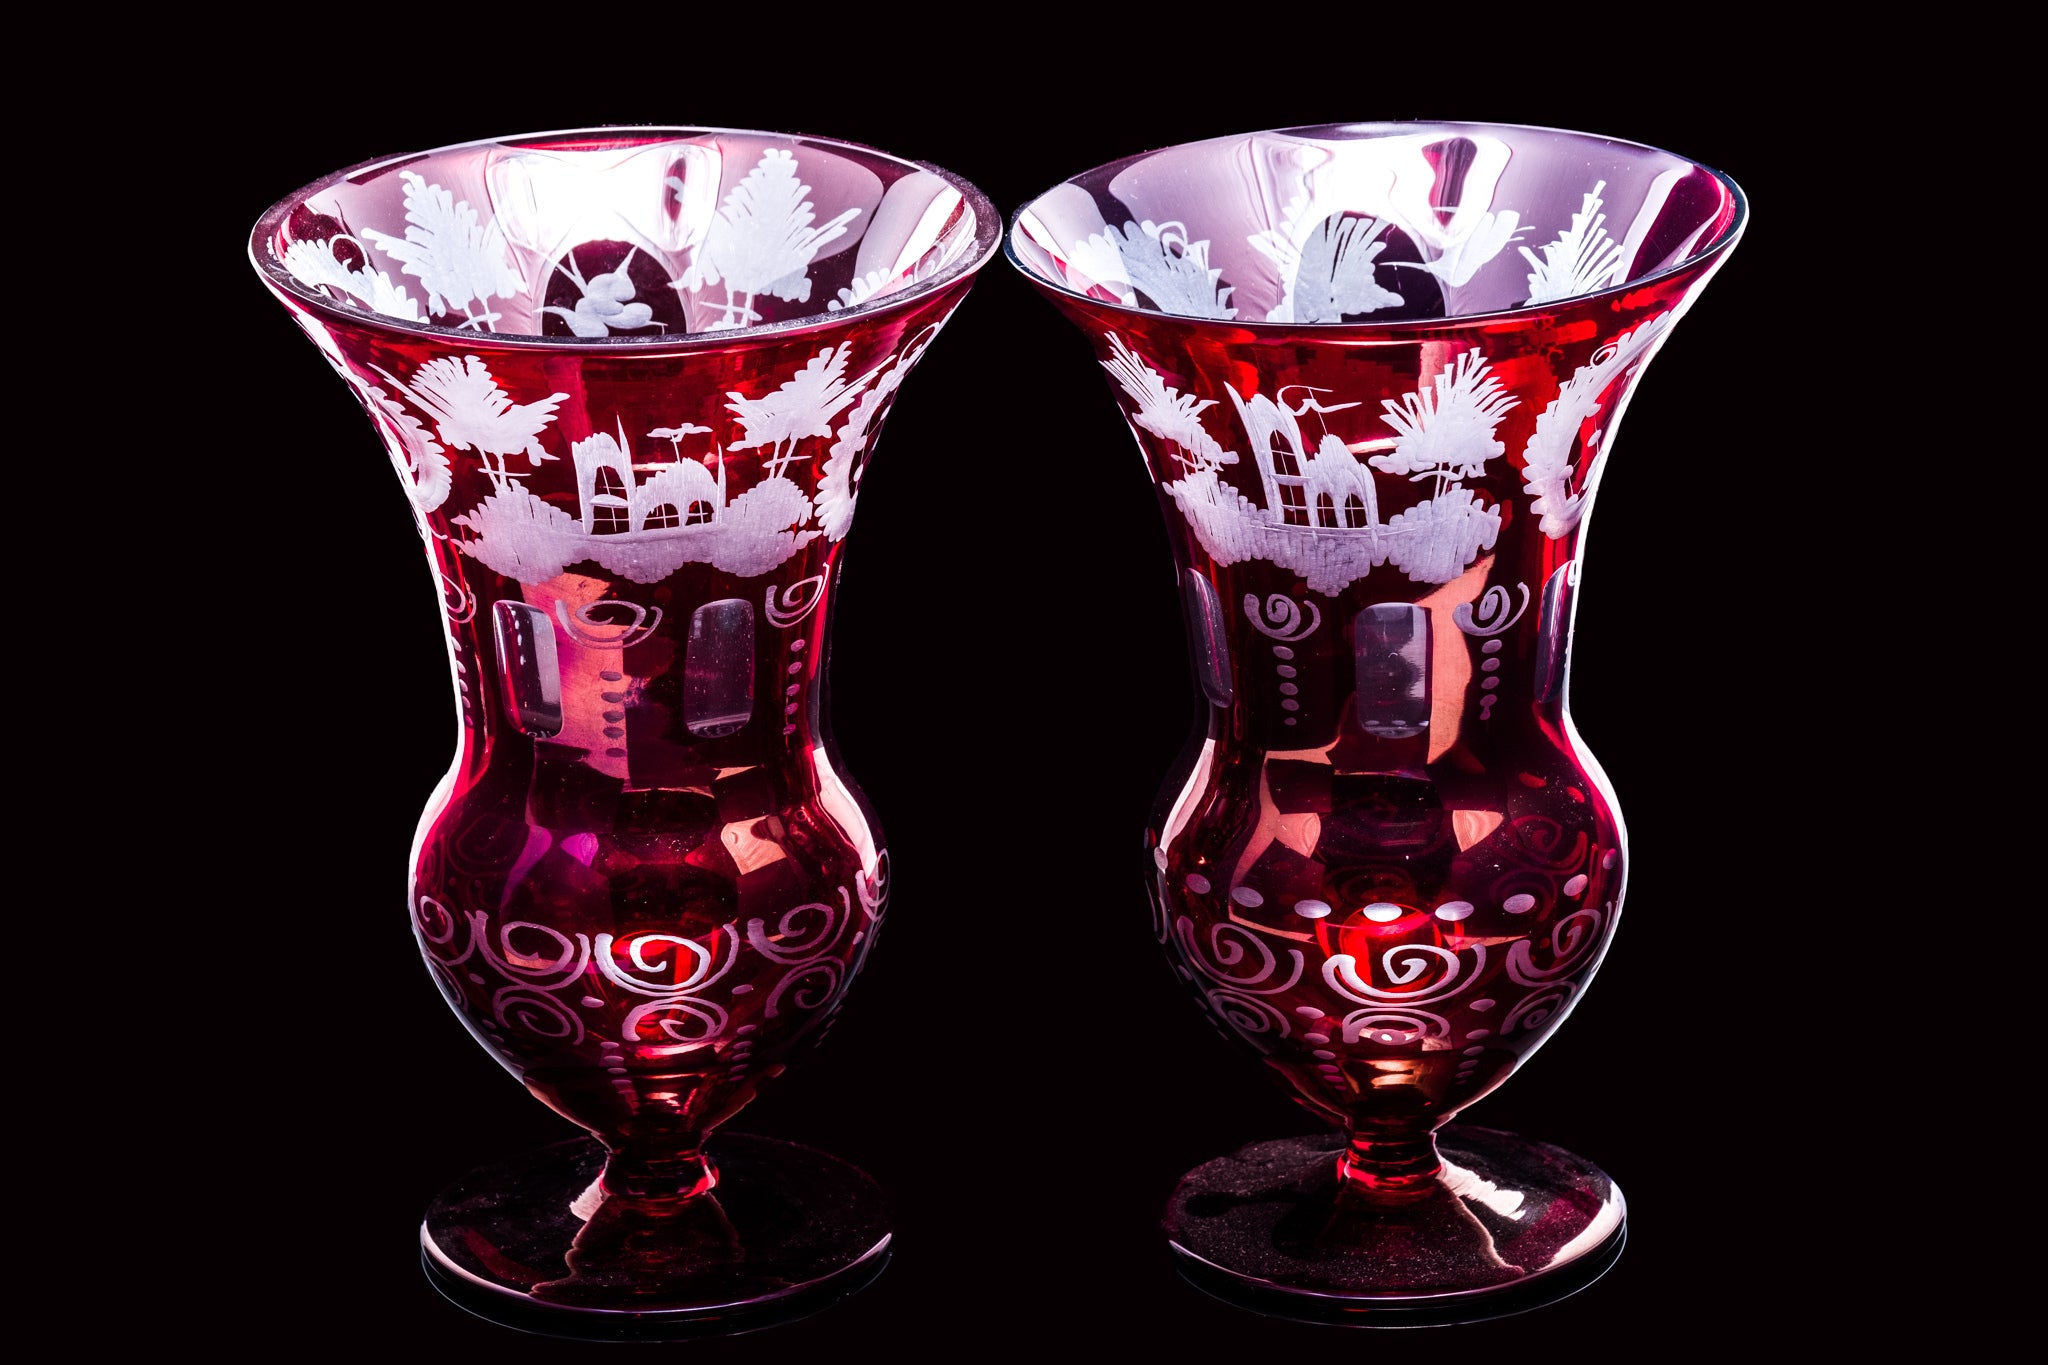 A Pair of Bohemian Cut Glass Vases.